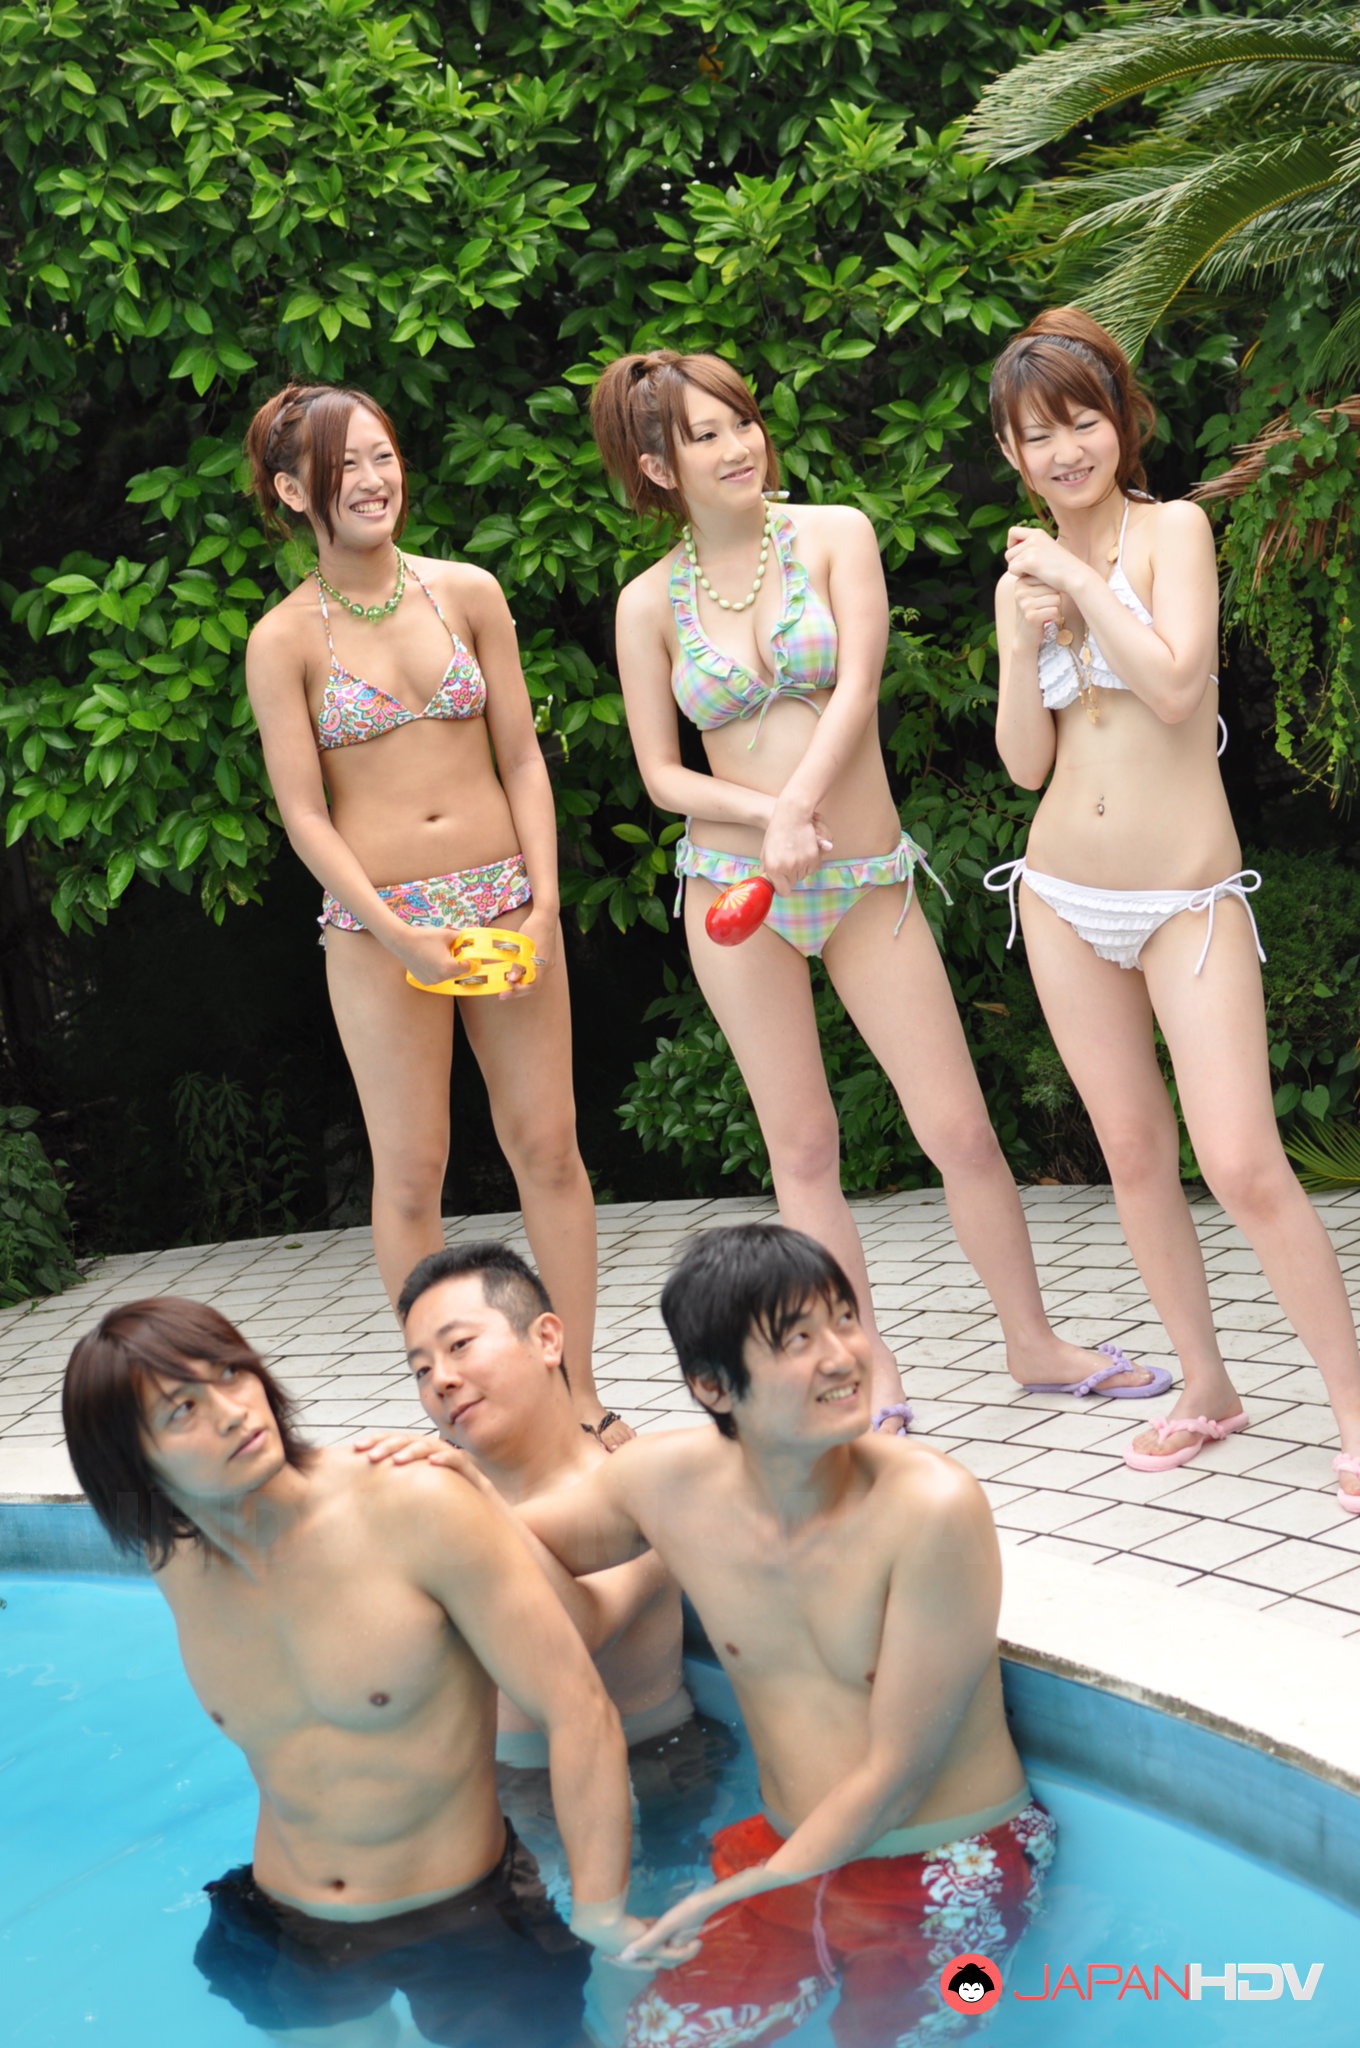 Pool Side Party - Japanese girls enjoy in some sexy pool party